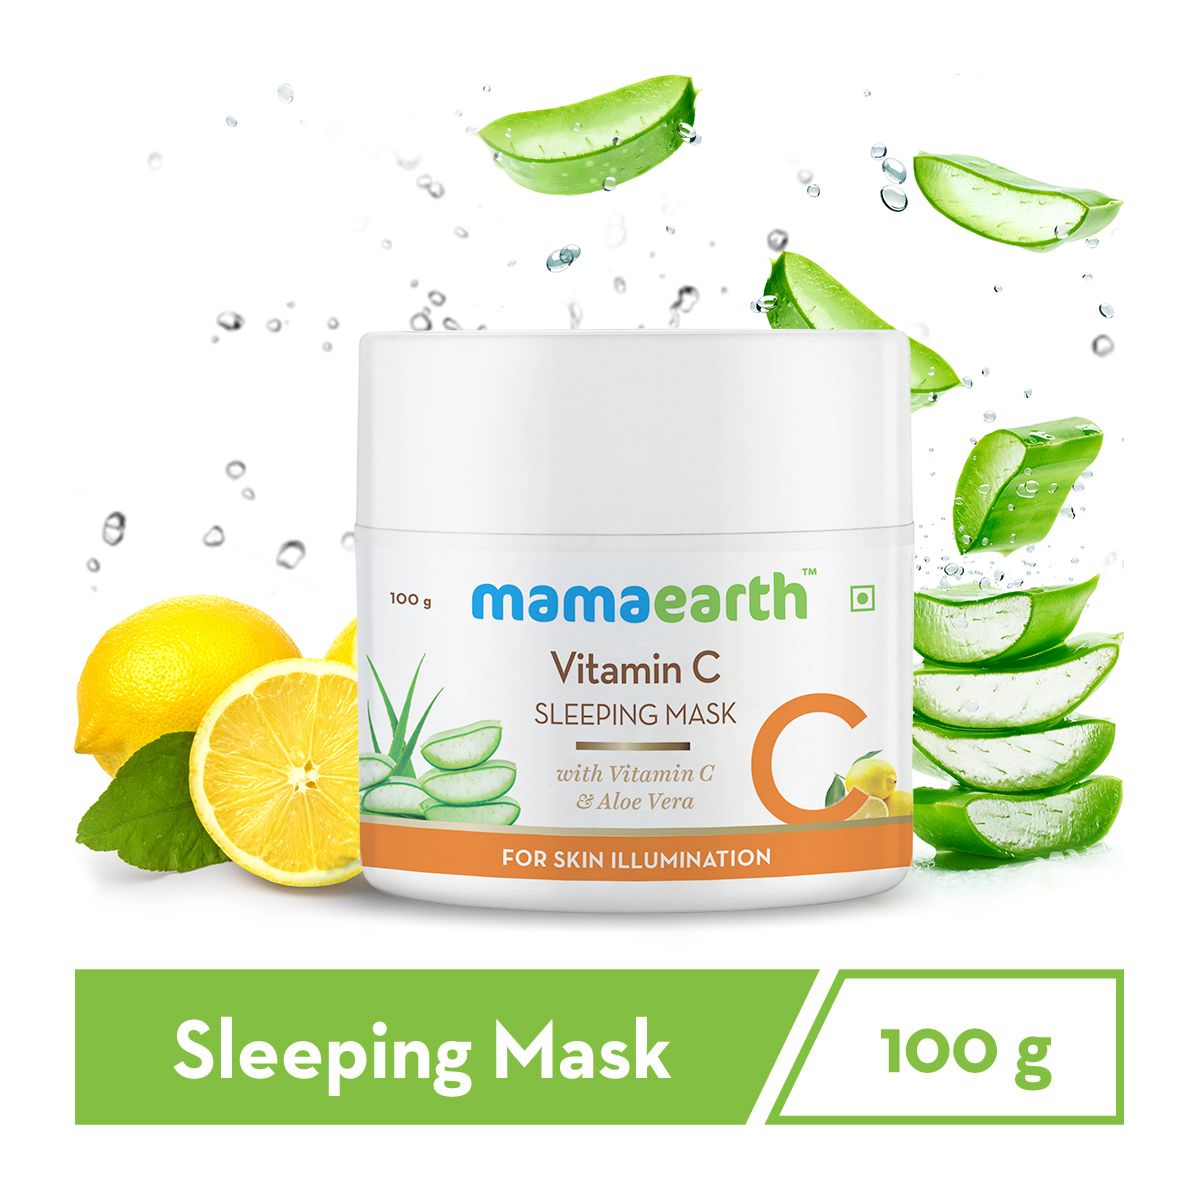 Mamaearth Vitamin C Sleeping Mask Better Than Others Available In The Market